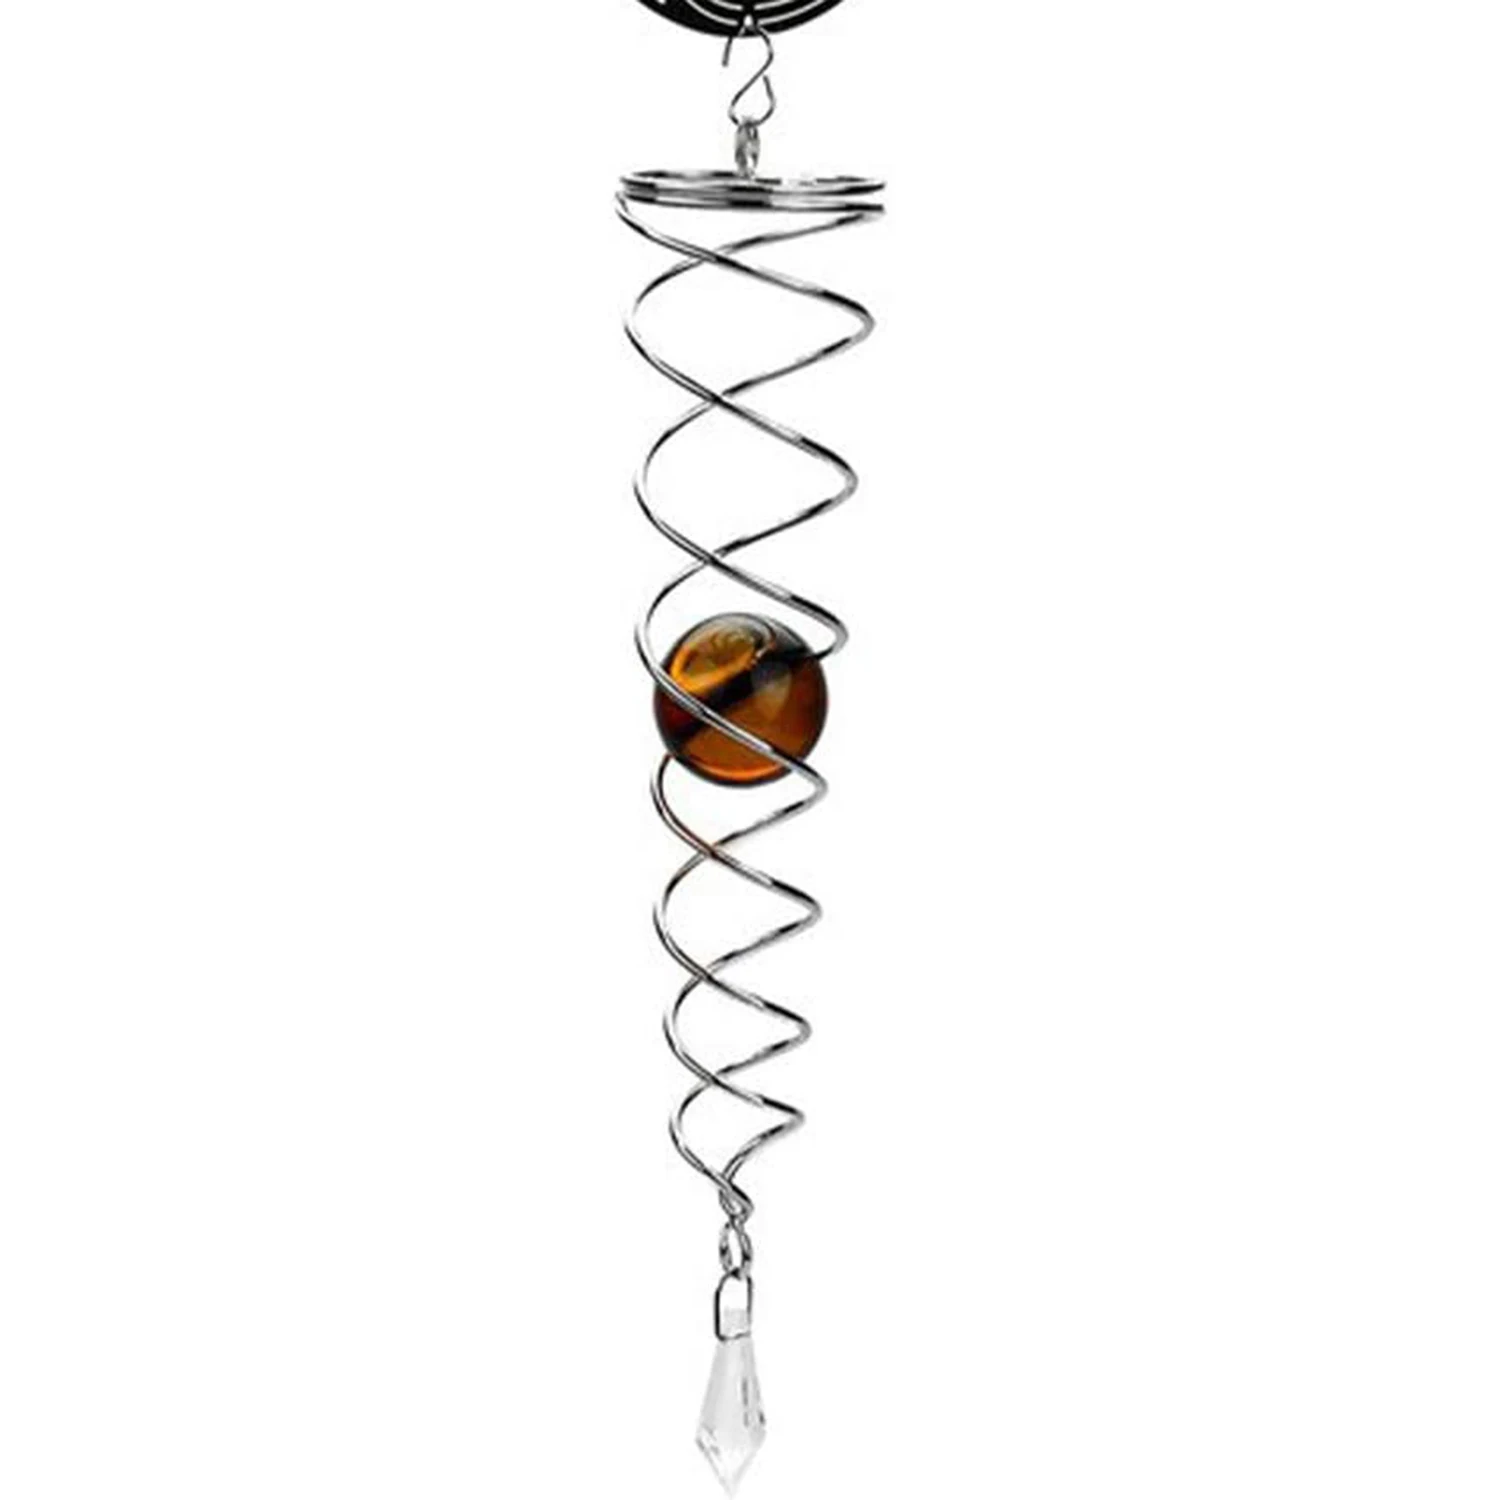 Metal Wind Spinner,Hanging Wind Chime Yin Yang with Crystal Ball for Garden Q2J8 